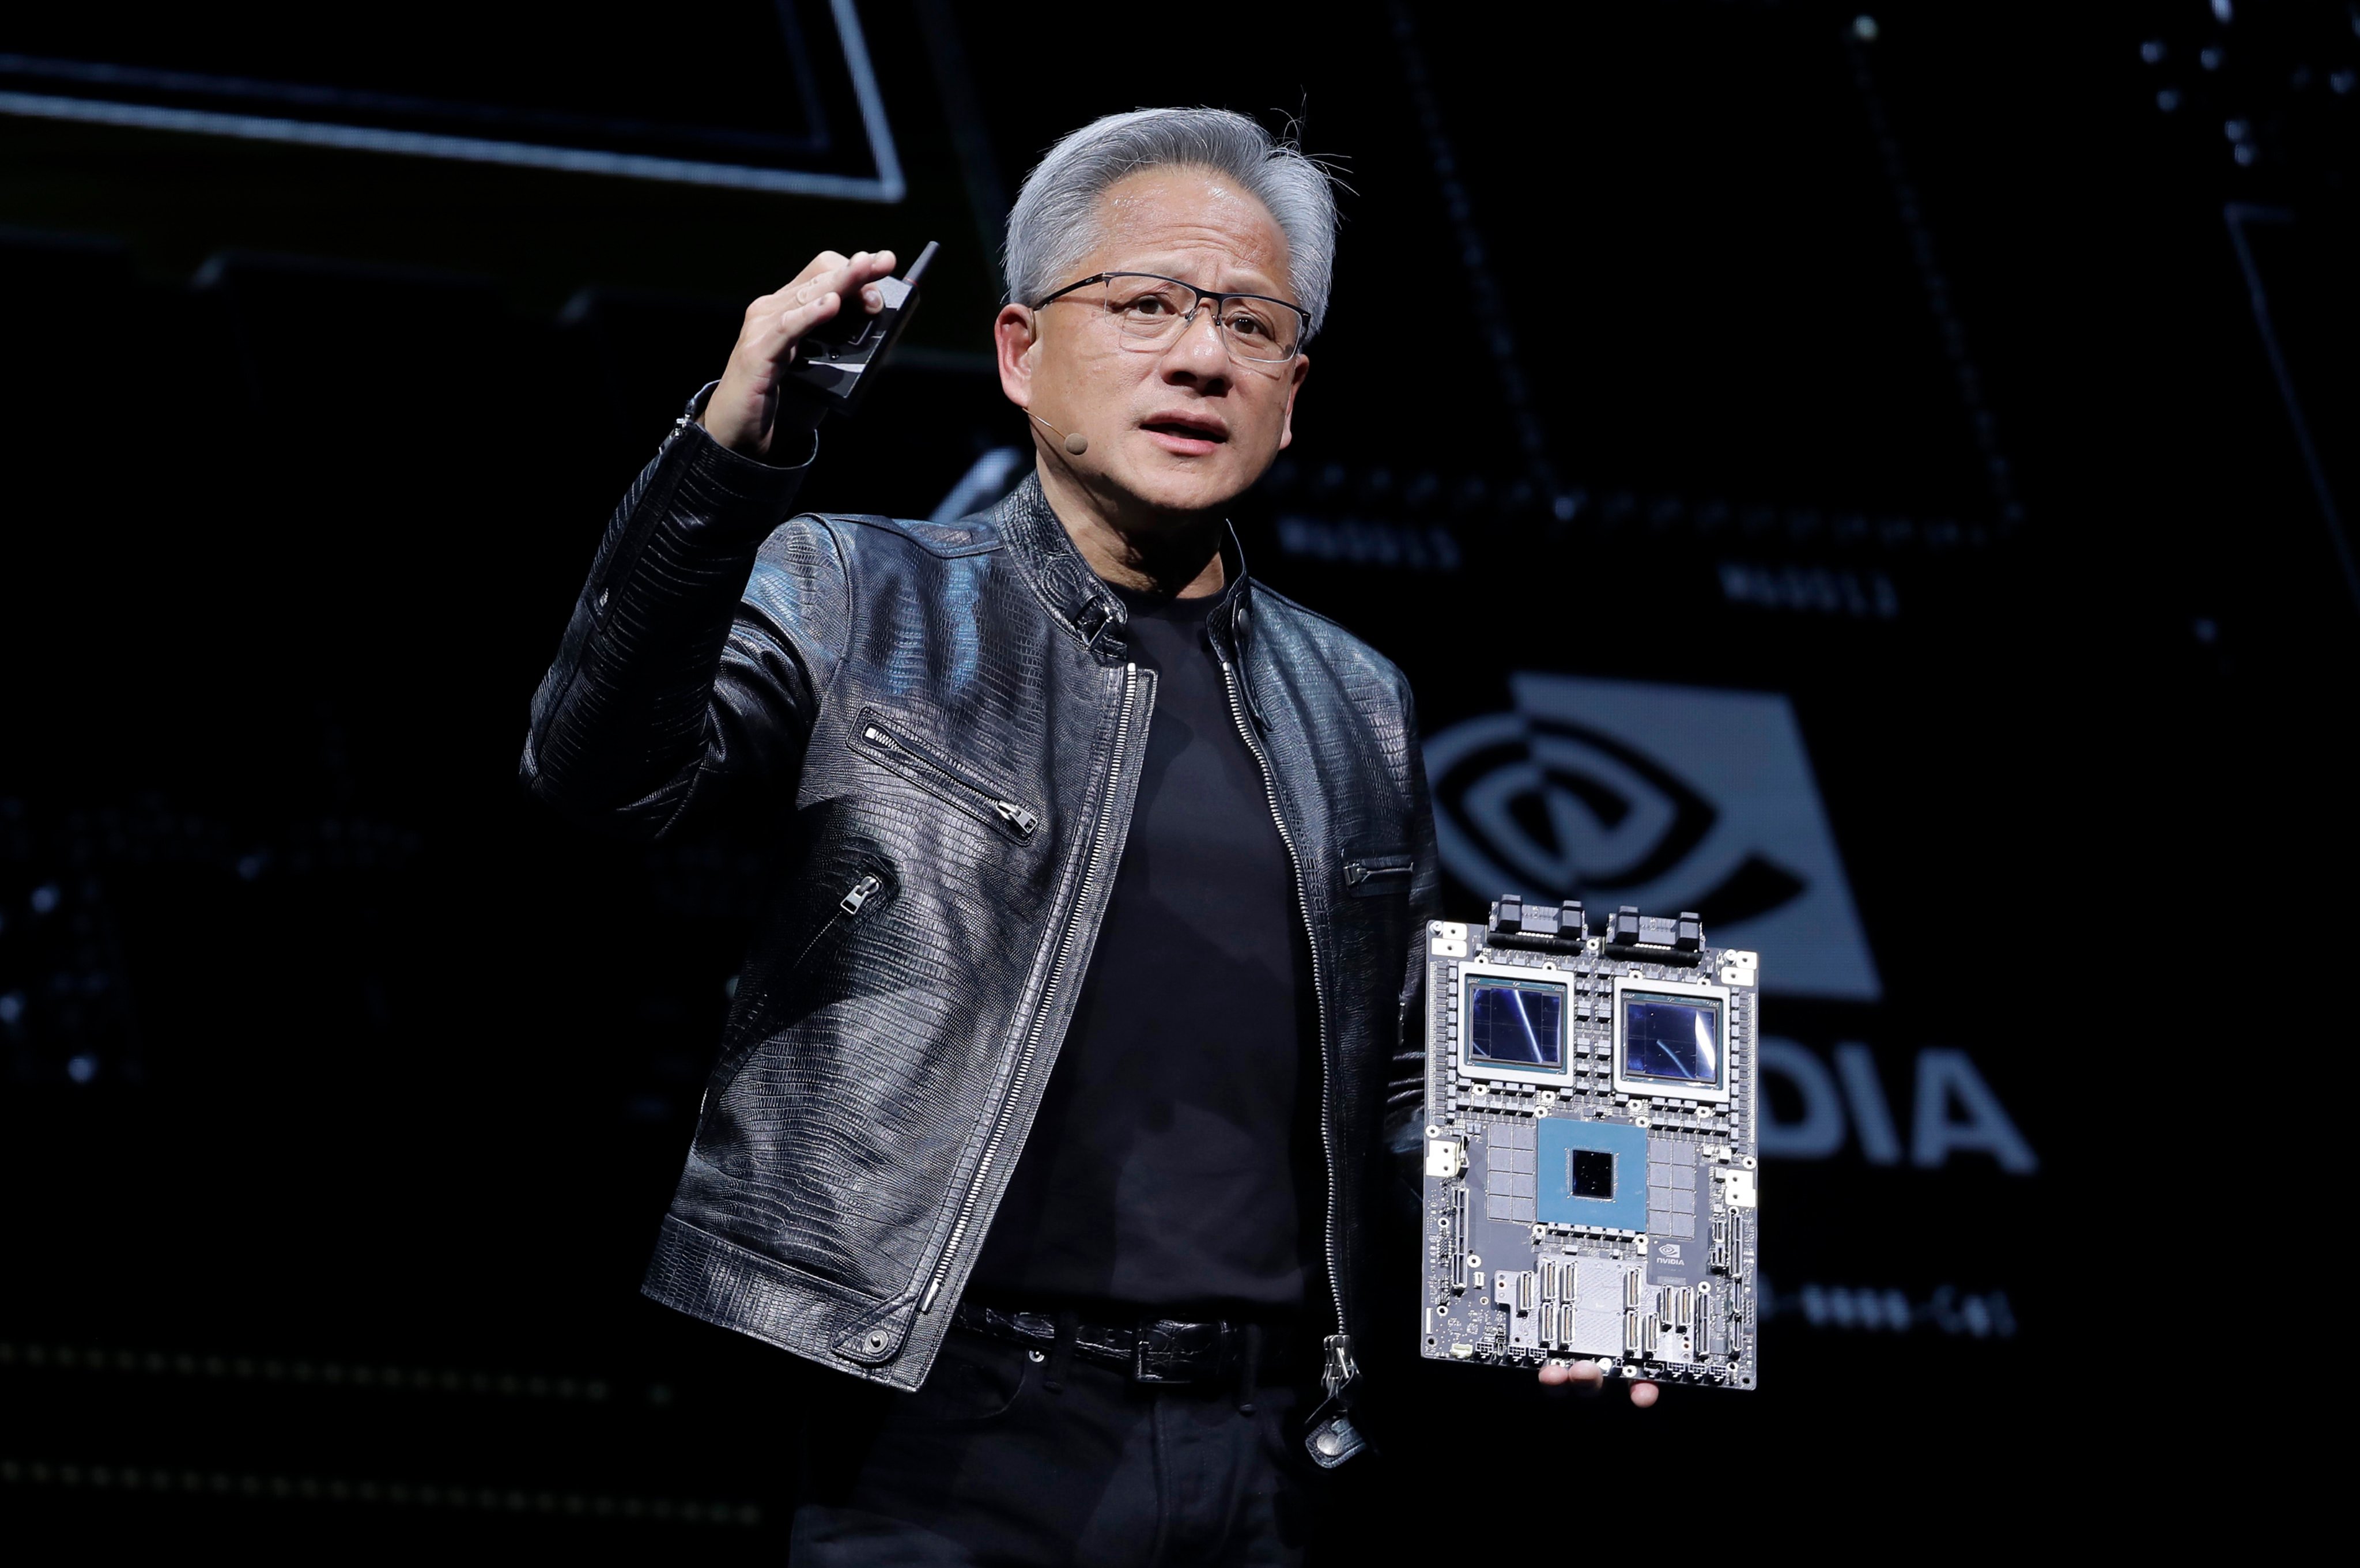 Nvidia founder and chief executive Jensen Huang provides an update on the markets where his company’s hardware and software products are being deployed. Photo: AP